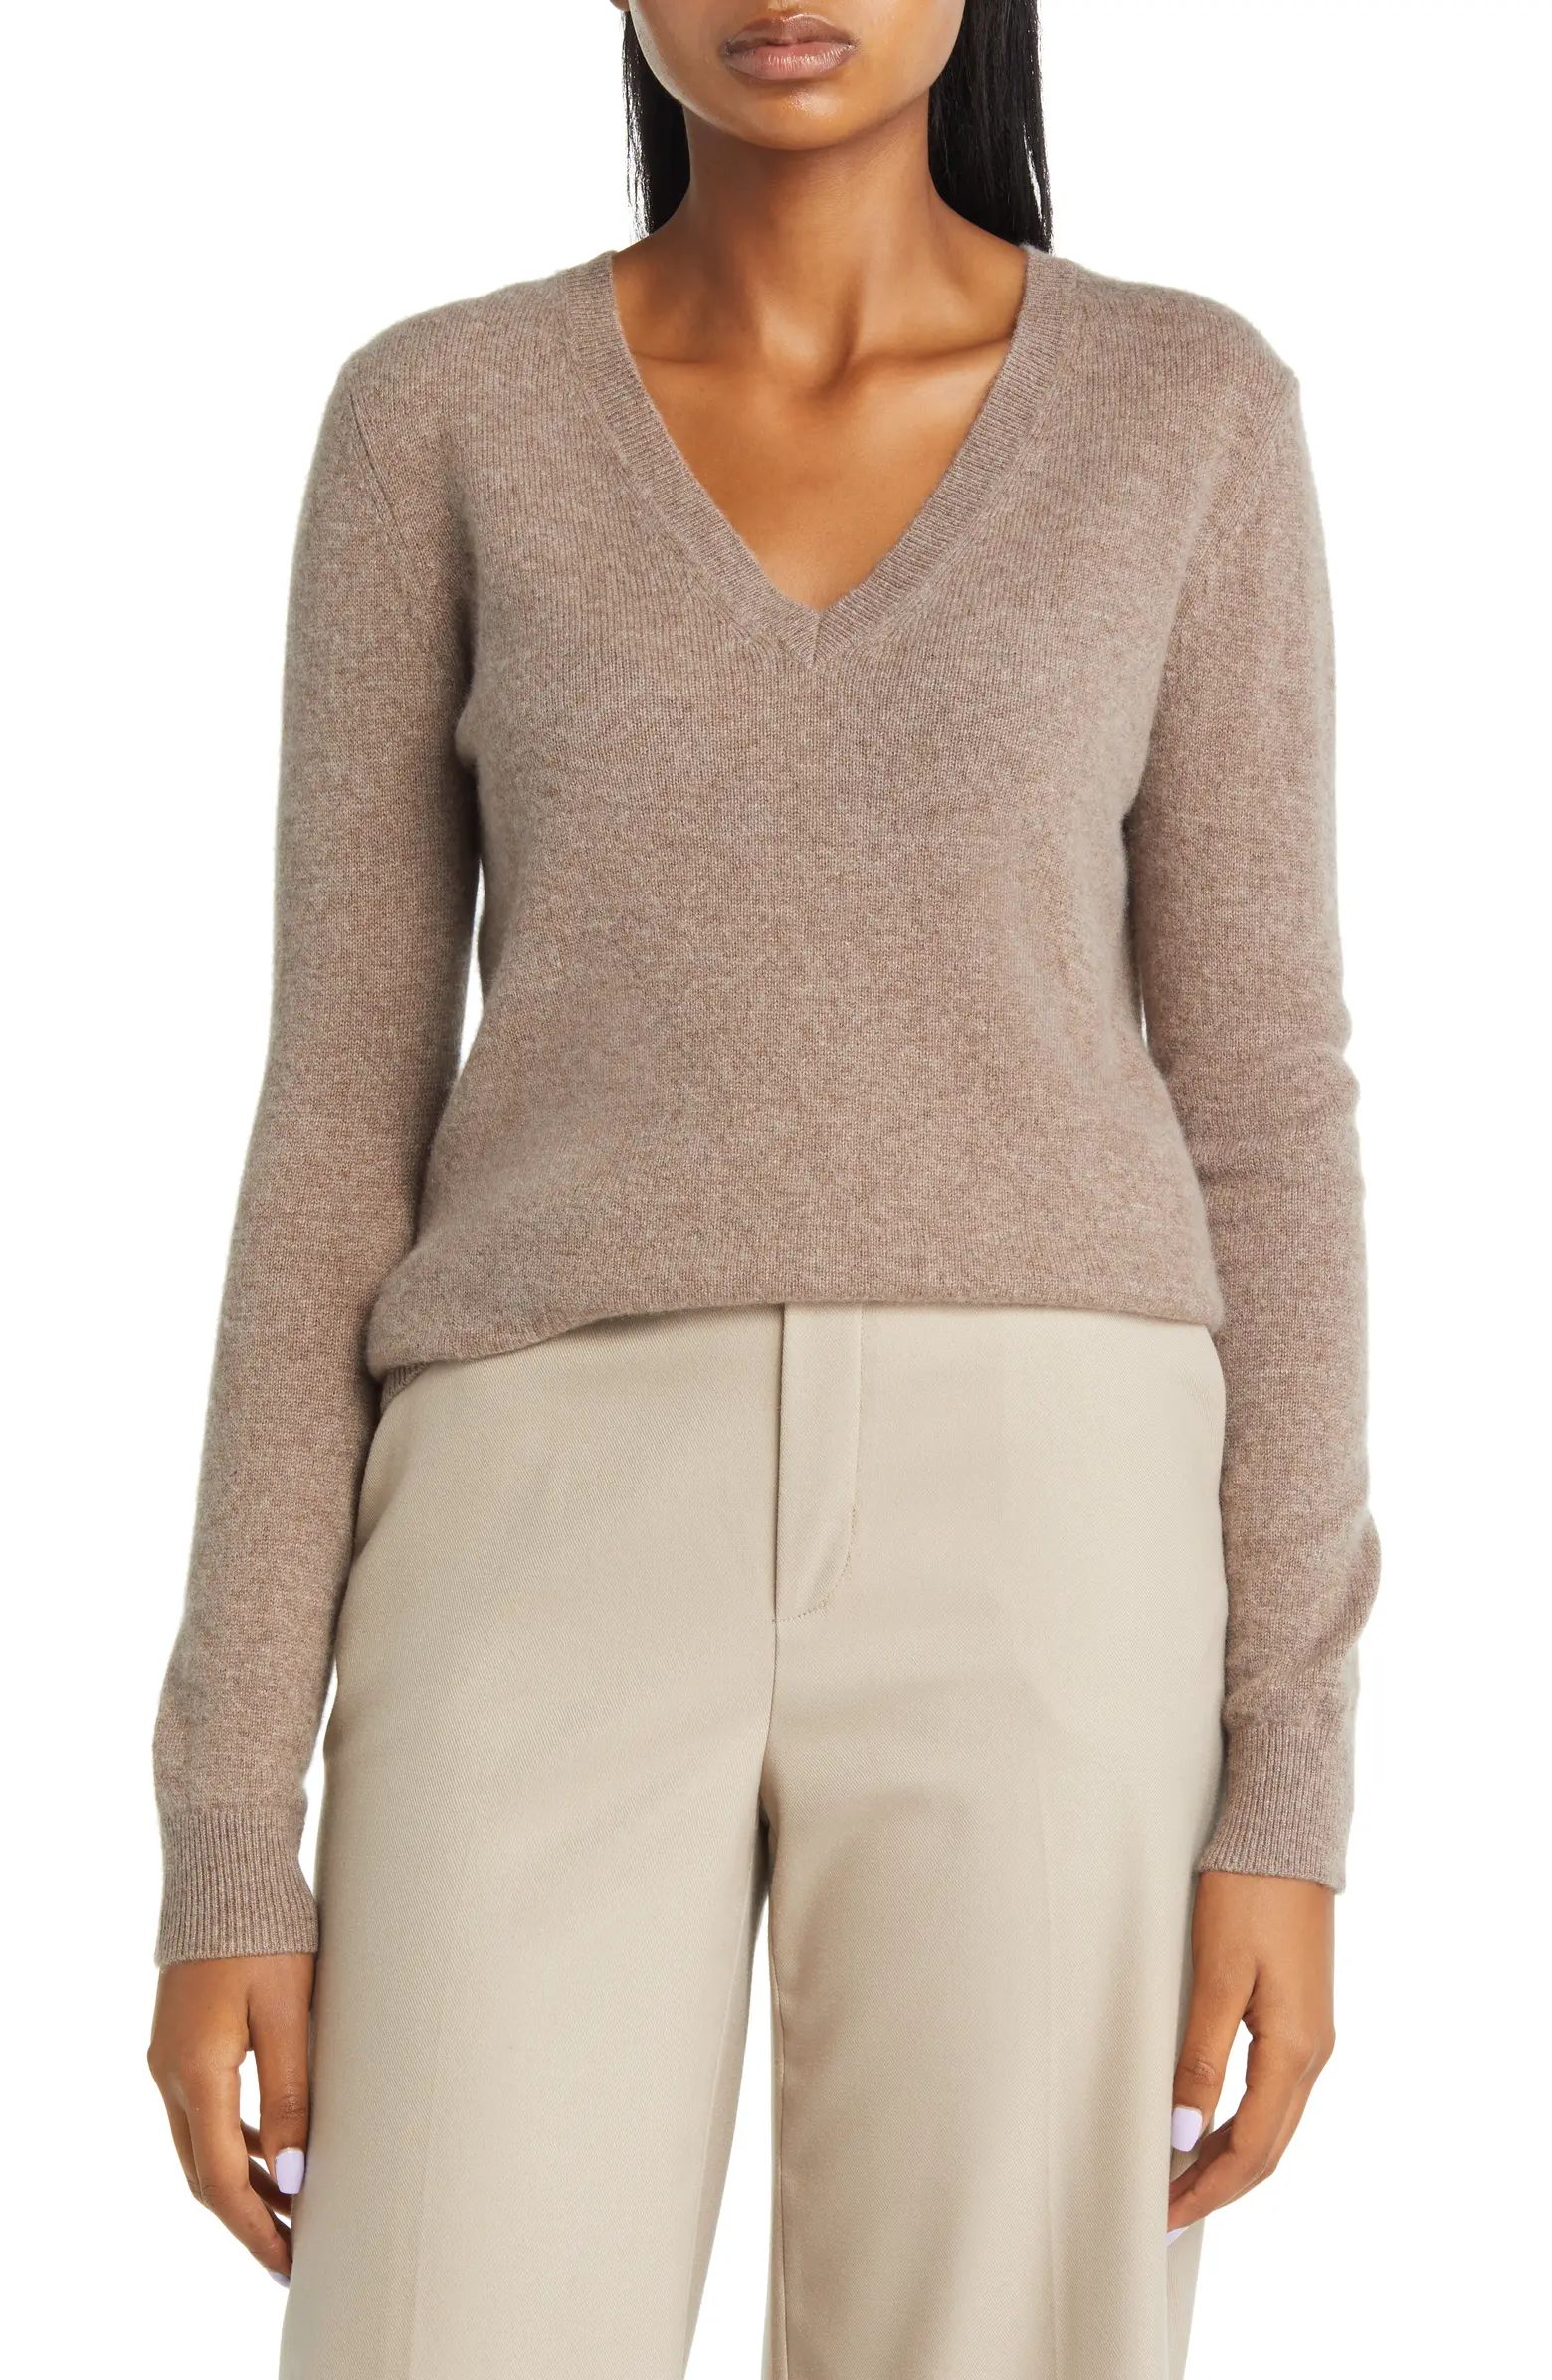 Whether lounging at home or catching up with friends at lunch, this cozy cashmere top with its de... | Nordstrom